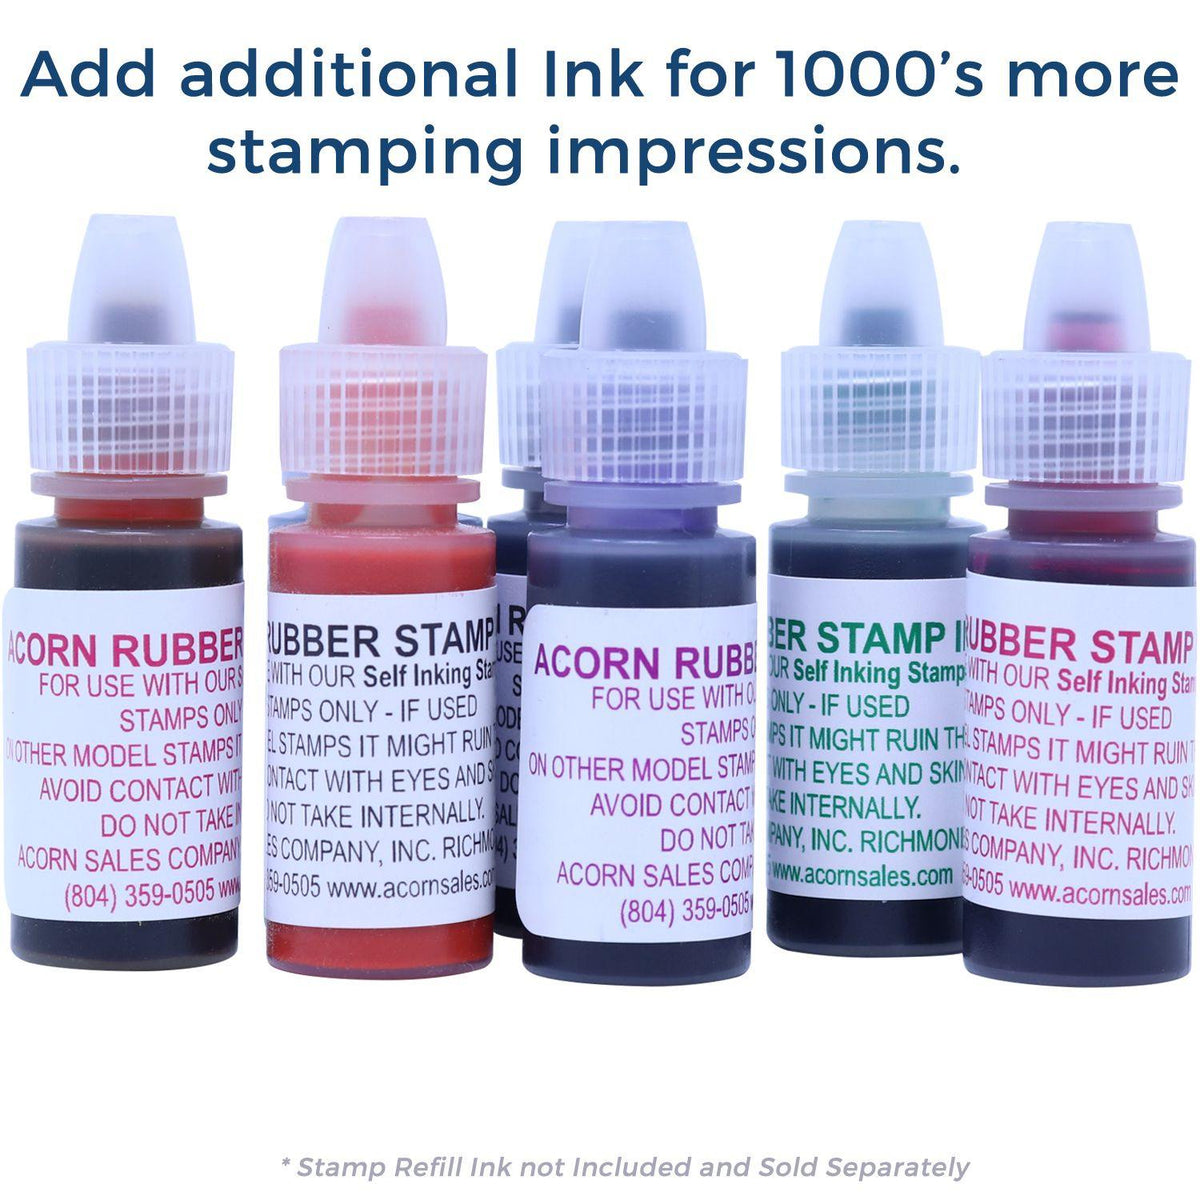 Refill Inks for Slim Pre-Inked Check Your Work Stamp Available